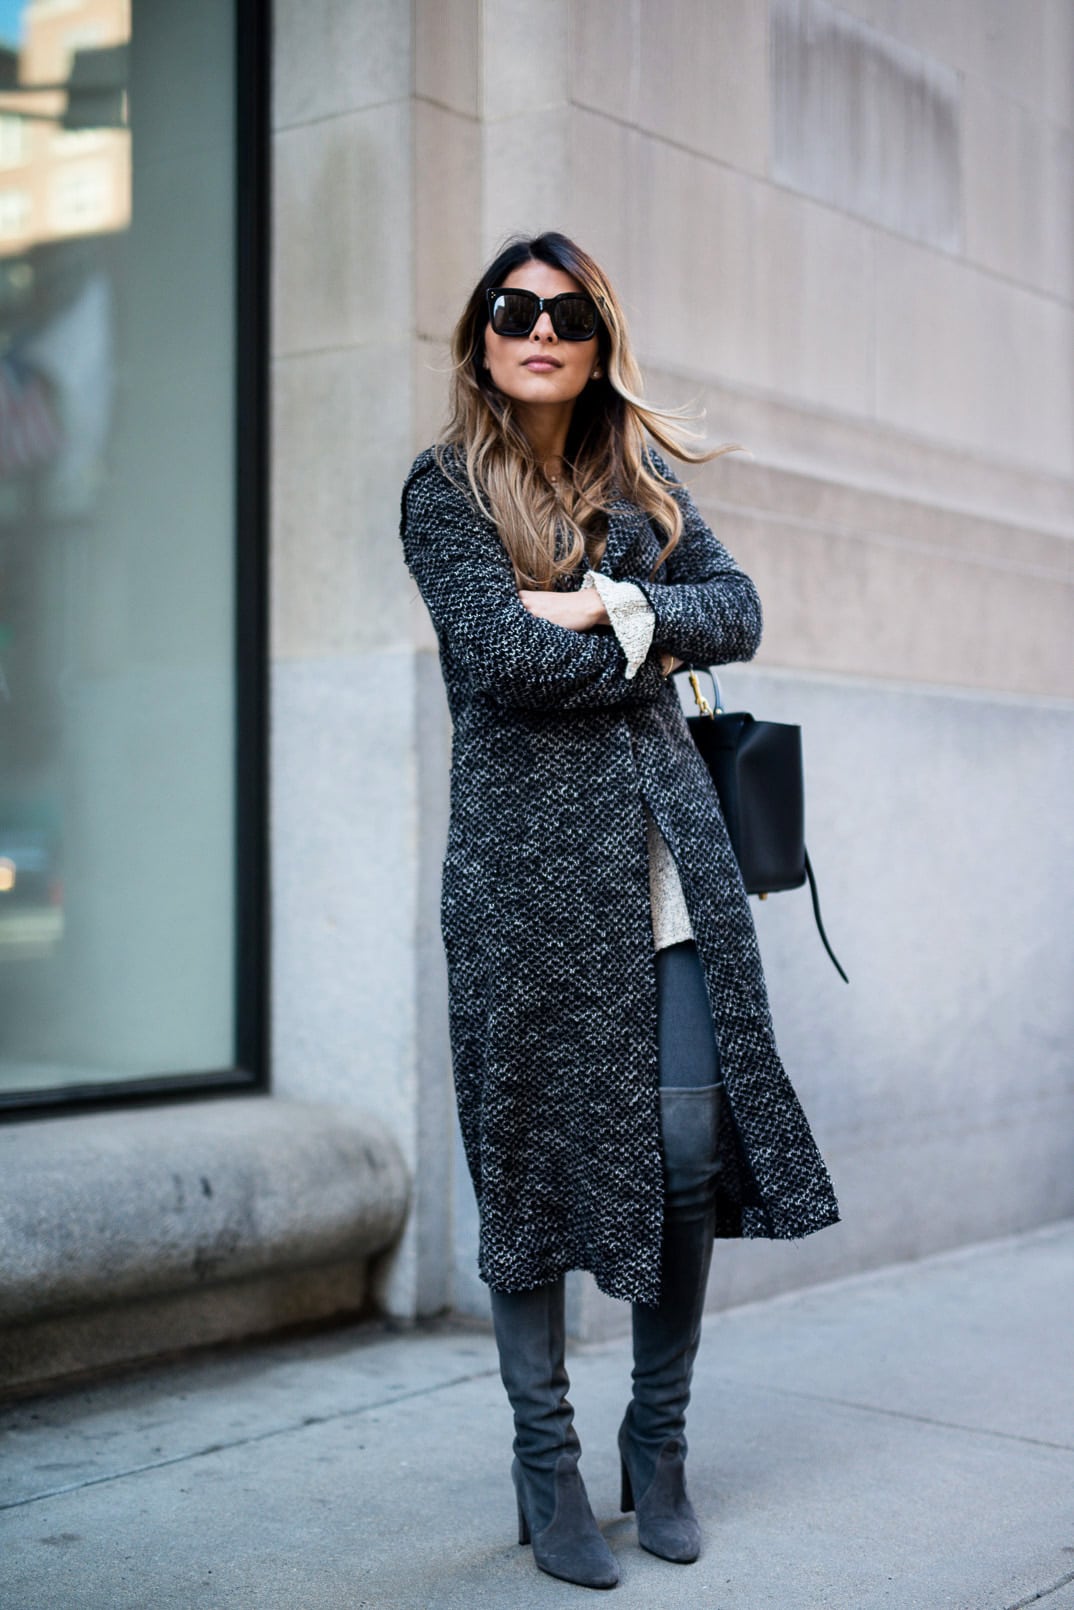 Pam Hetlinger, The Girl From Panama wearing a willow and clay tweed cardigan, stuart weitzman highland over the knee boots, topshop grey jeans, h&m grey sweater, celine belt bag, and celine sunglasses.